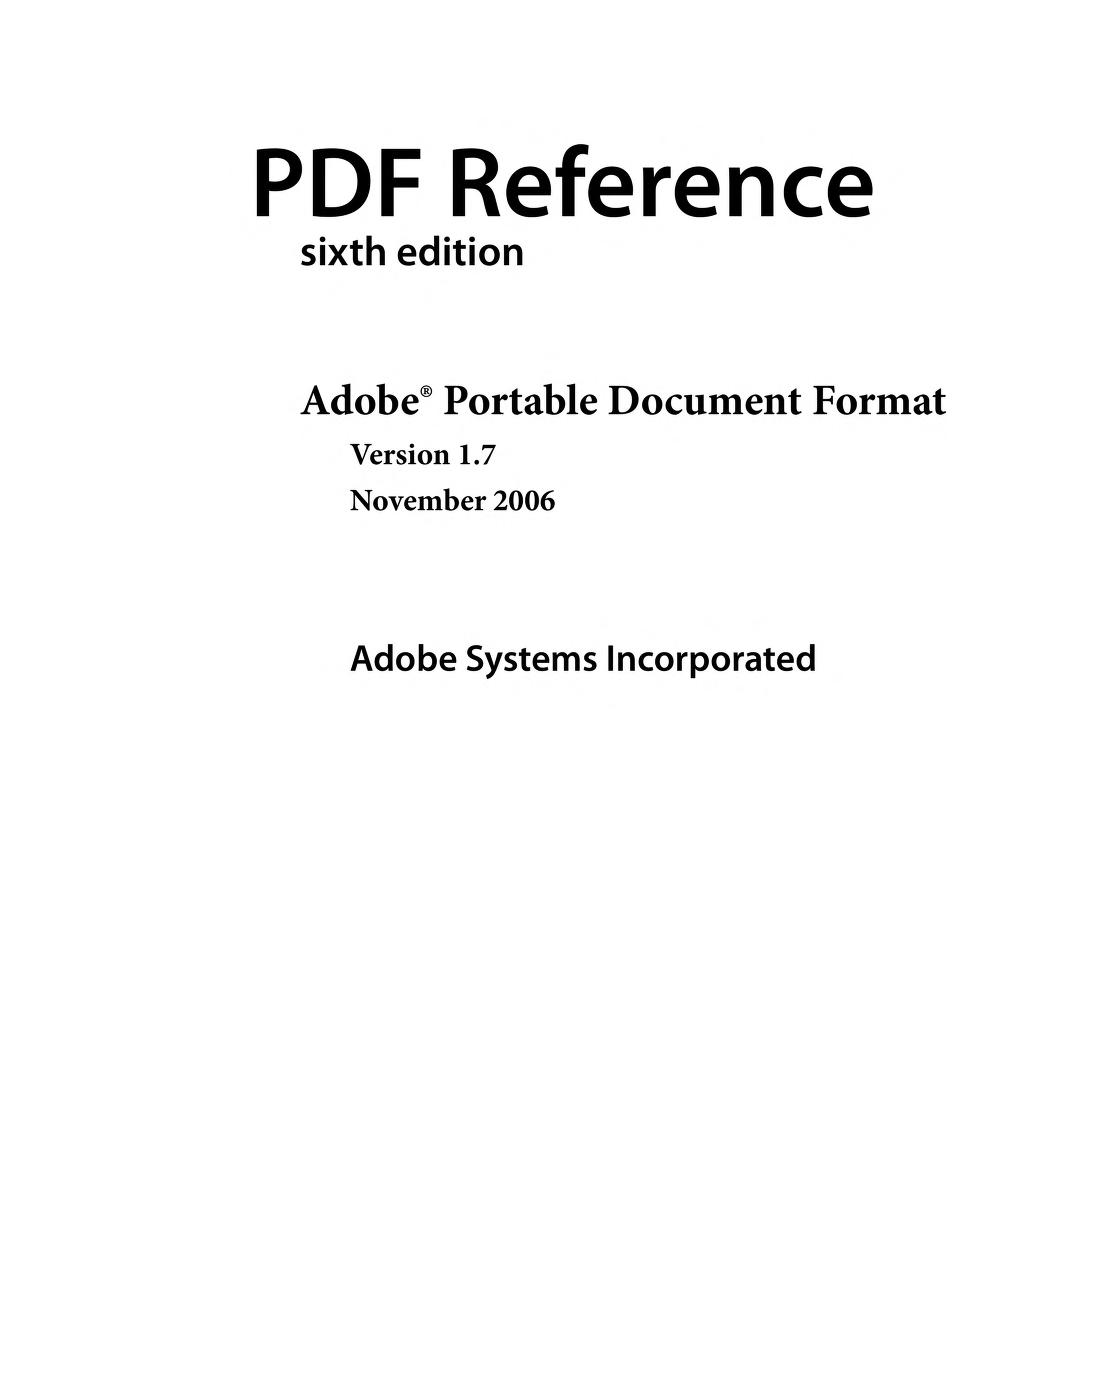 Latest pdf version 1.7 free download 2d animation software for windows 7 free download